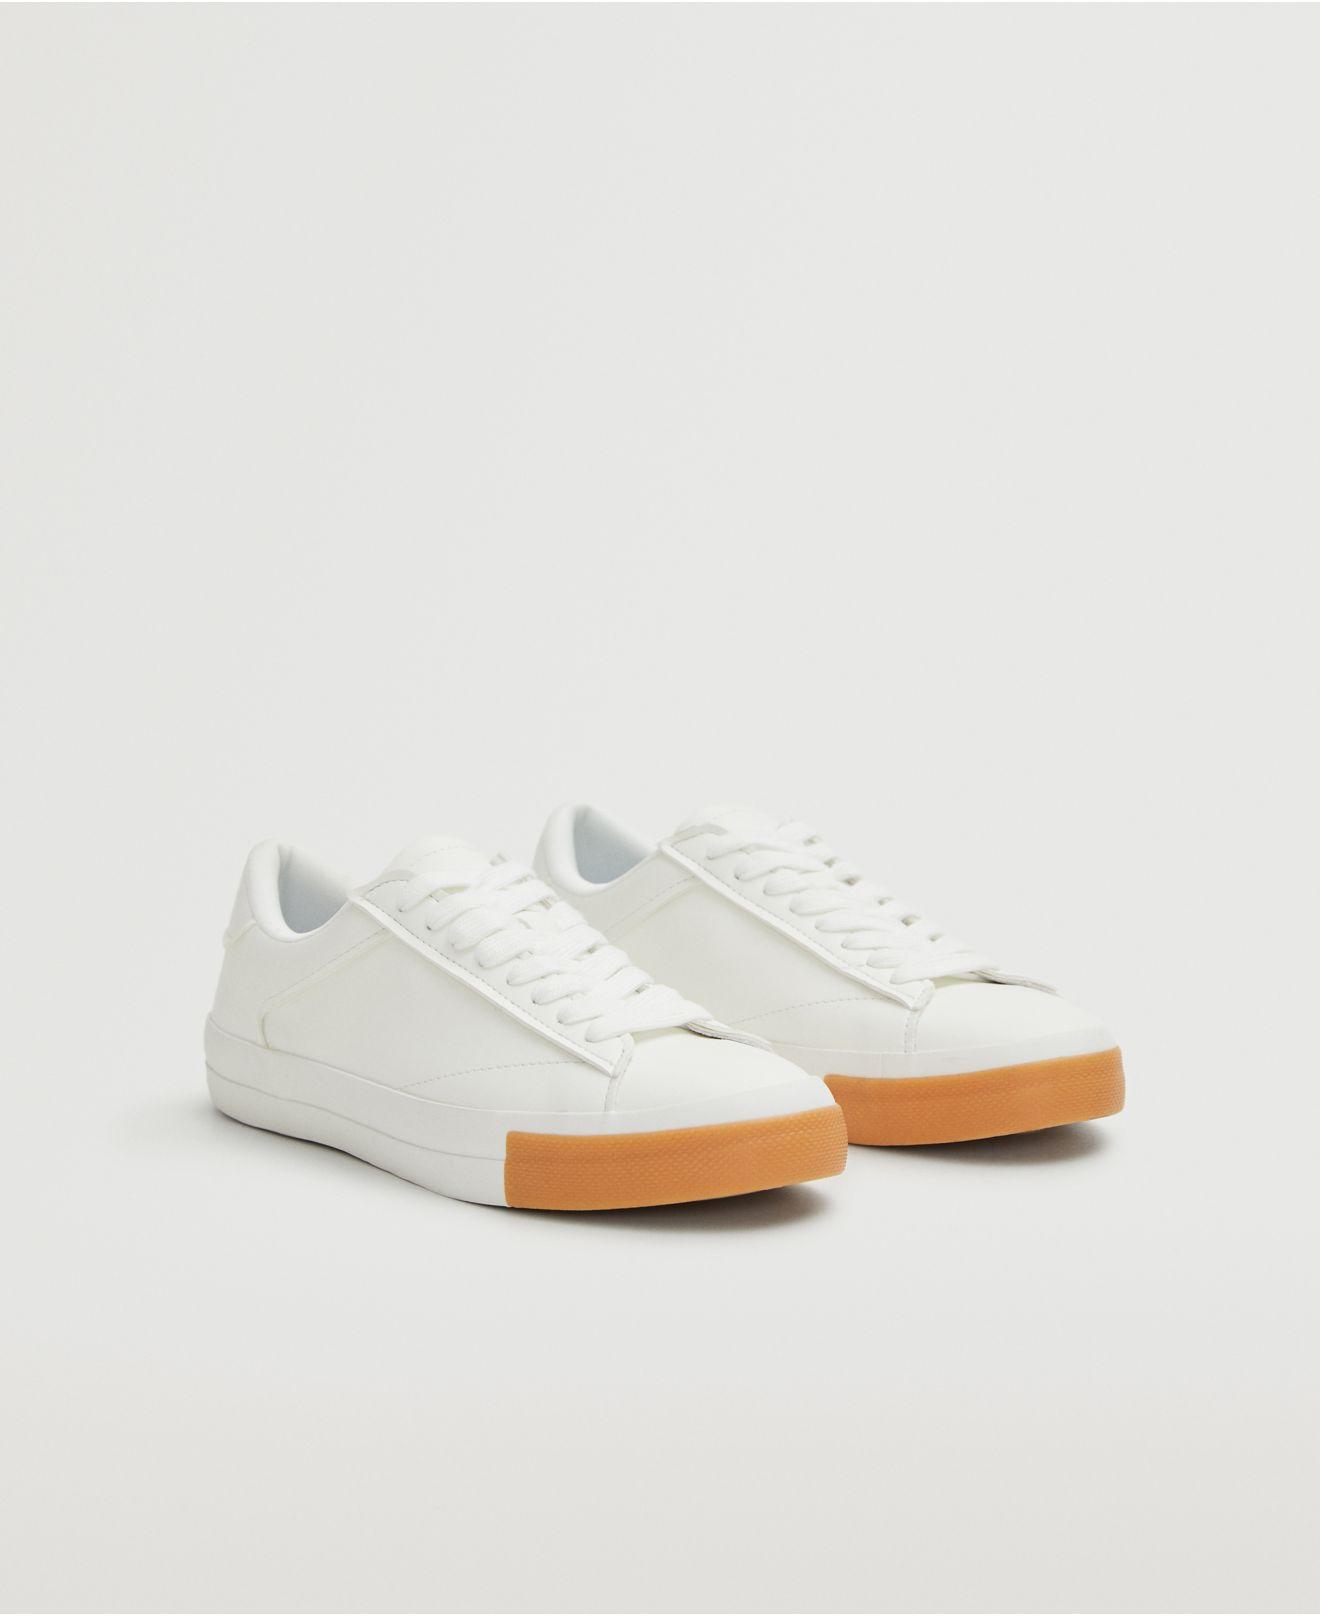 Mango Laces Basic Sneakers in White | Lyst